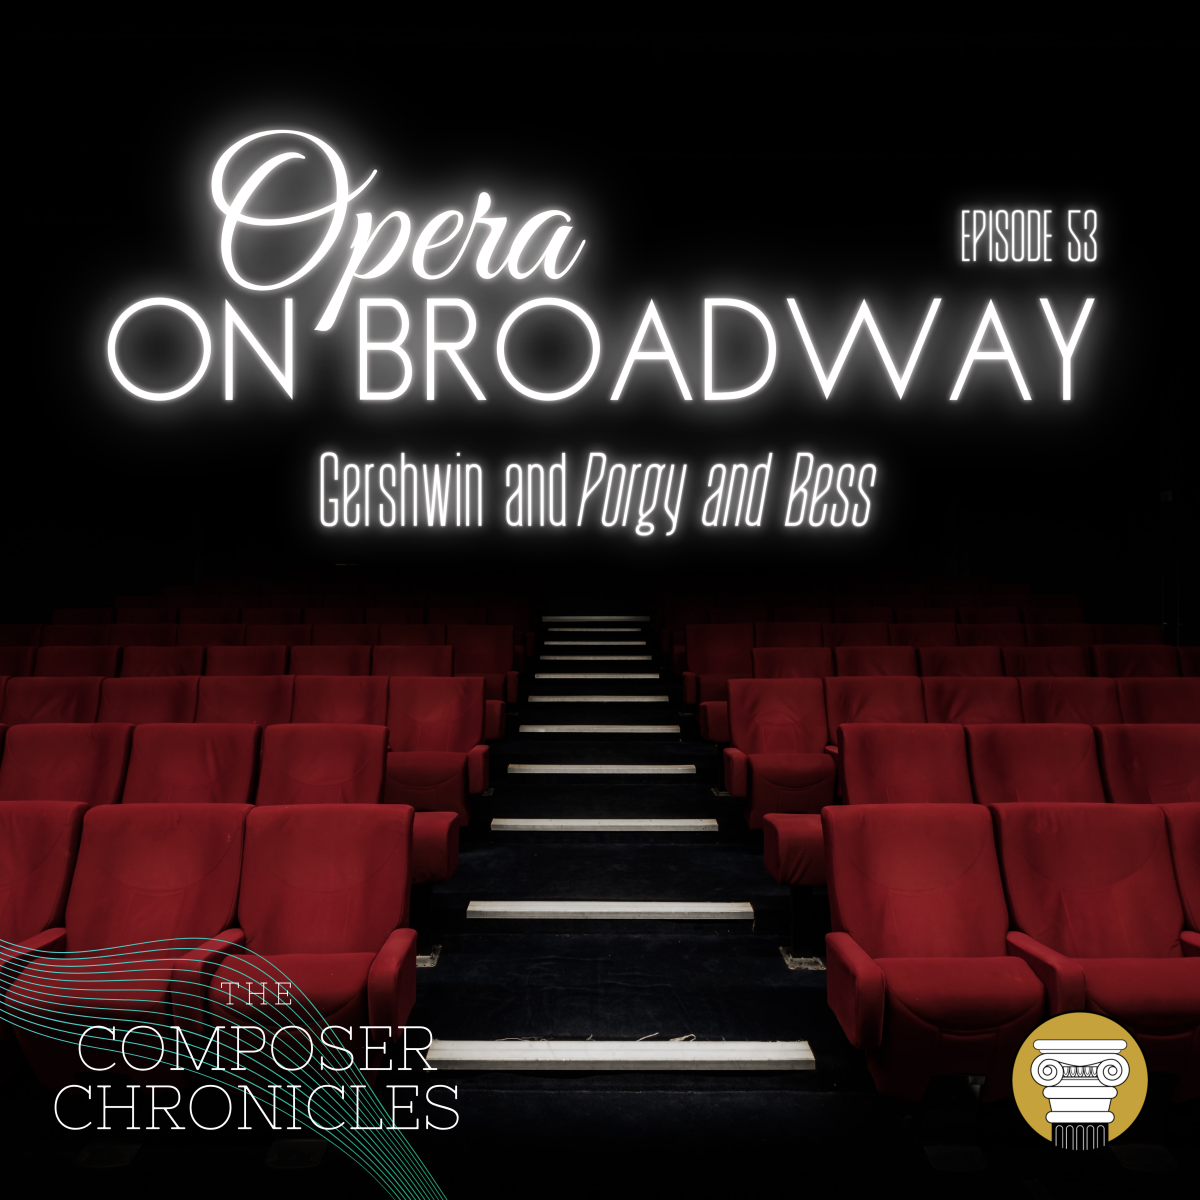 Ep. 53: Opera on Broadway – Gershwin and Porgy and Bess